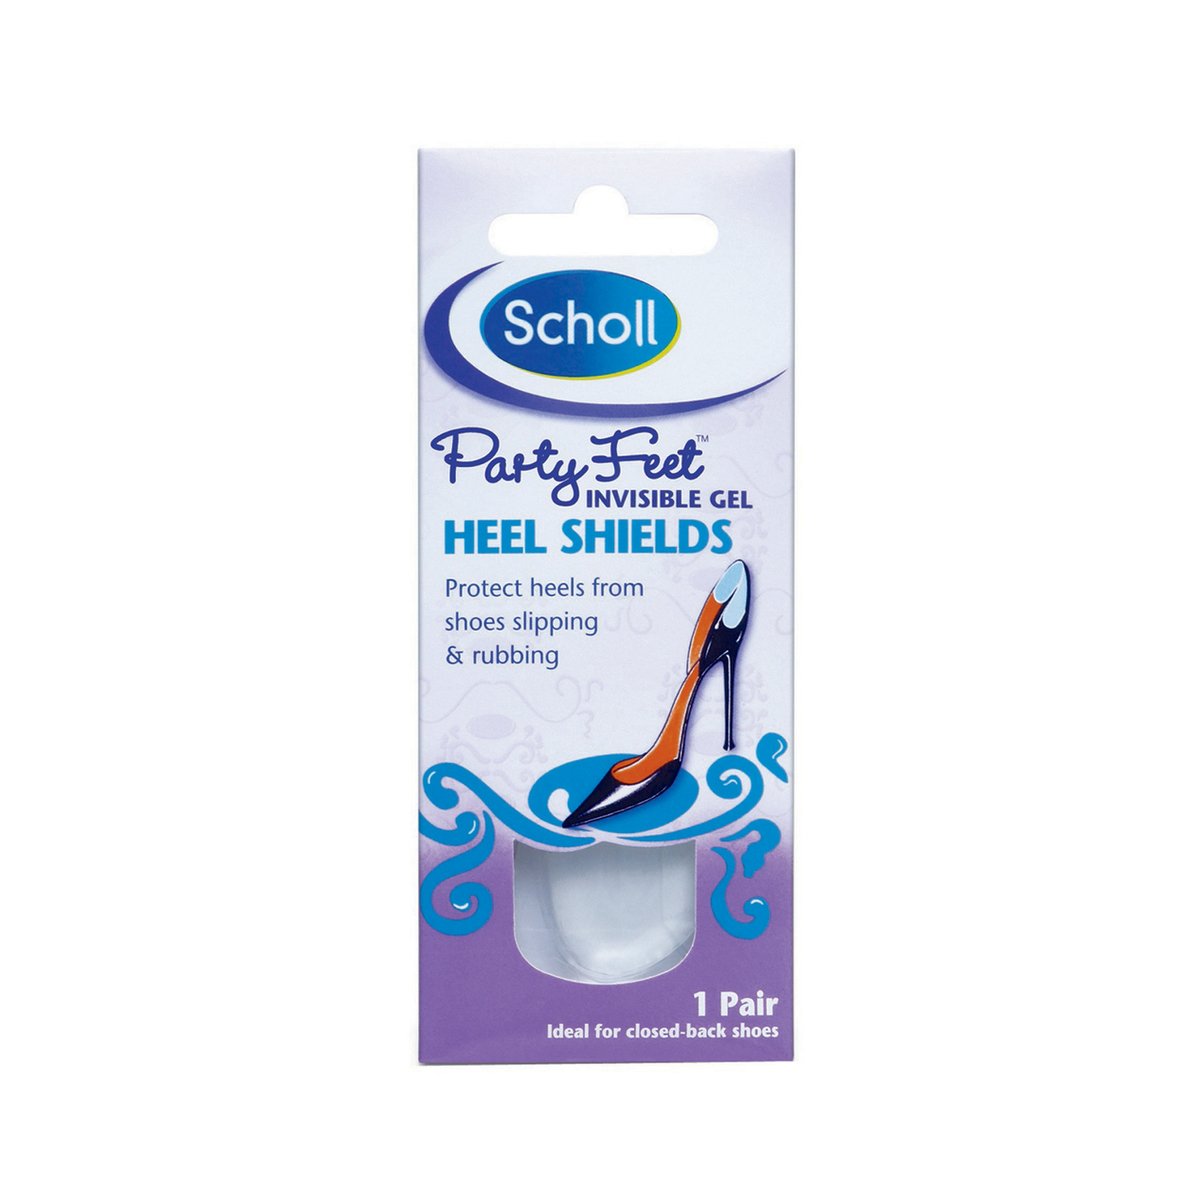 Scholl Foot Care Party Feet Invisible Gel Heel Shields 1 Pair